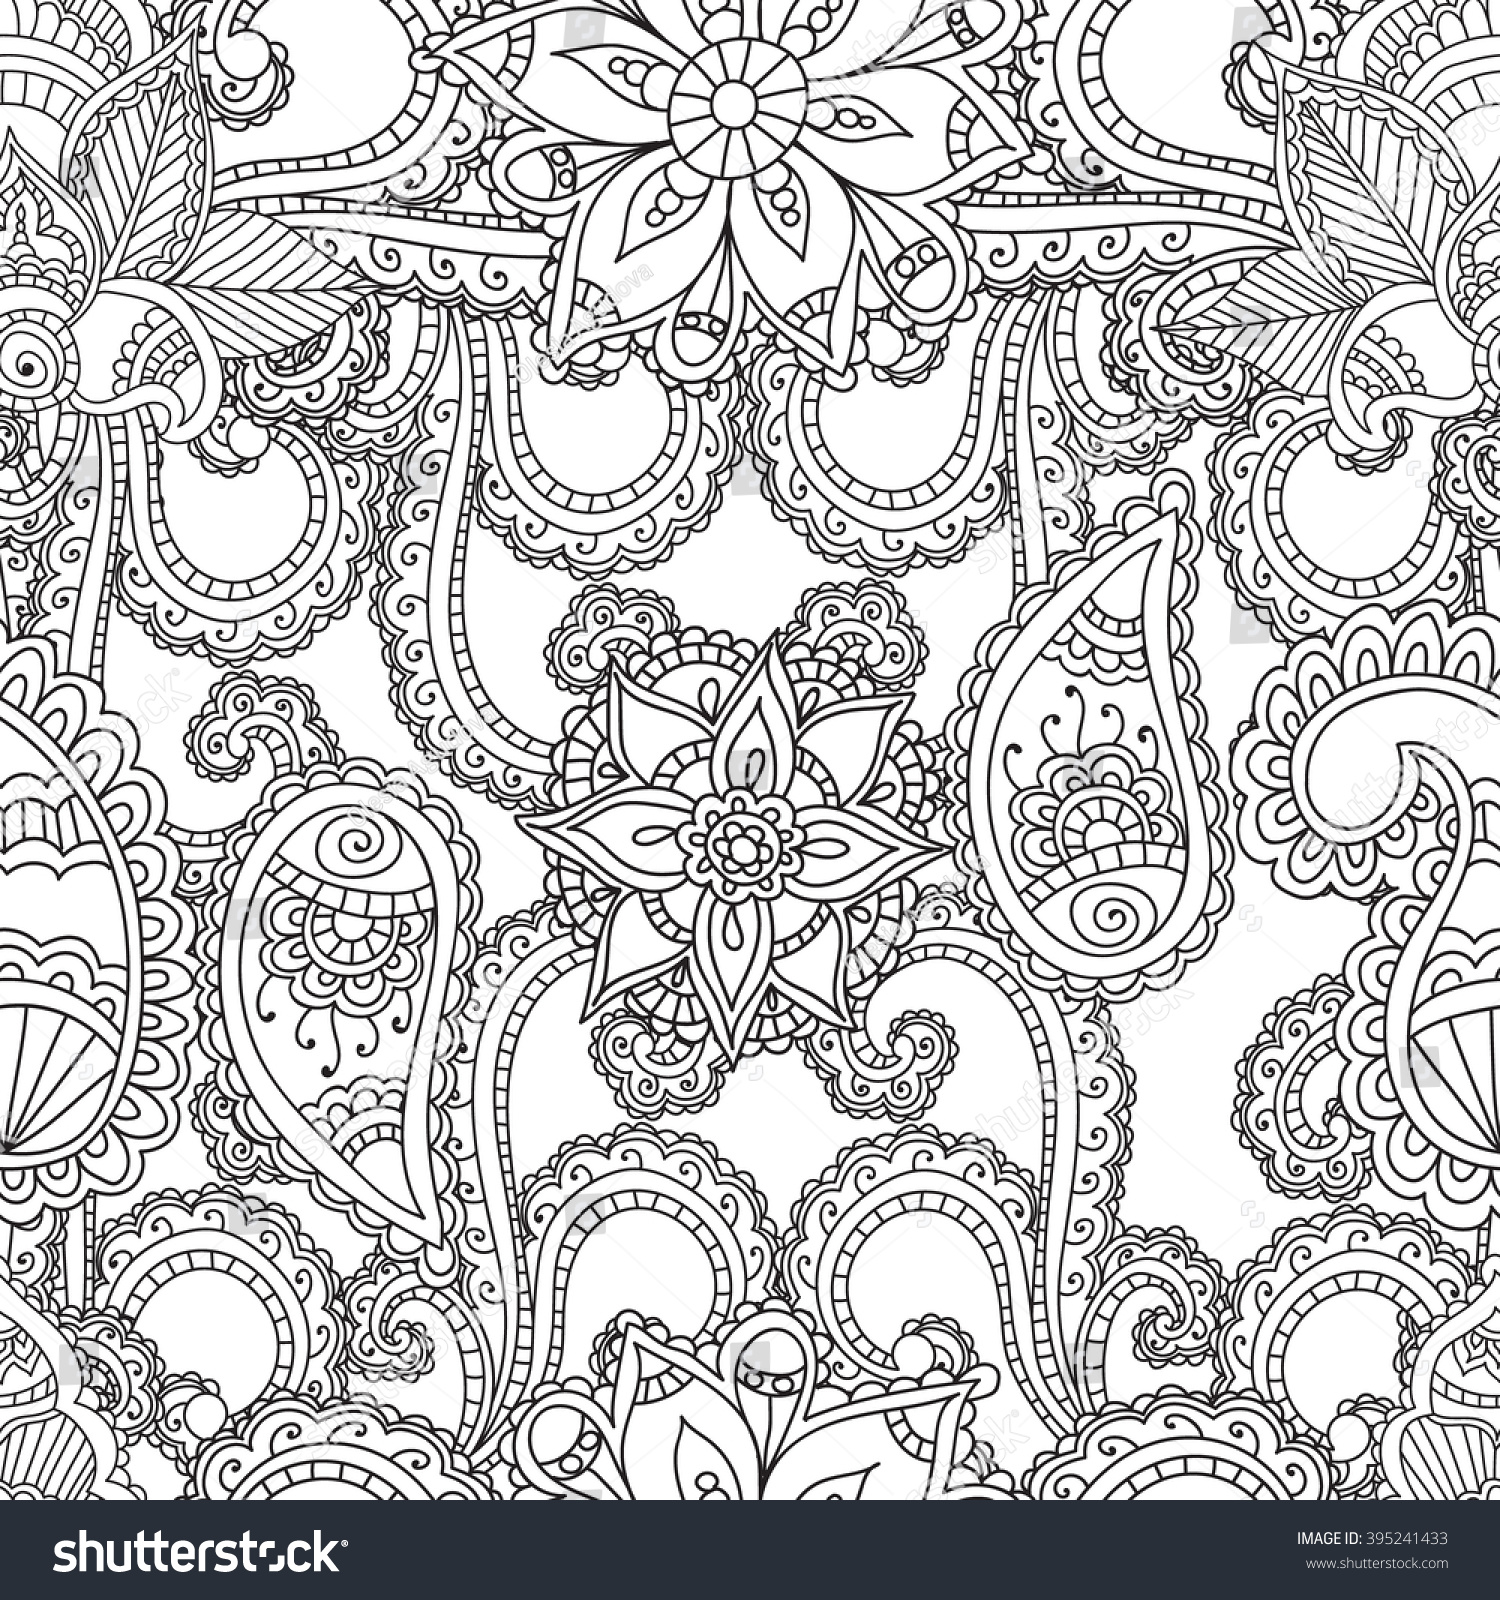 Coloring Pages Adults Seanless Patternhenna Mehndi Stock Vector ...